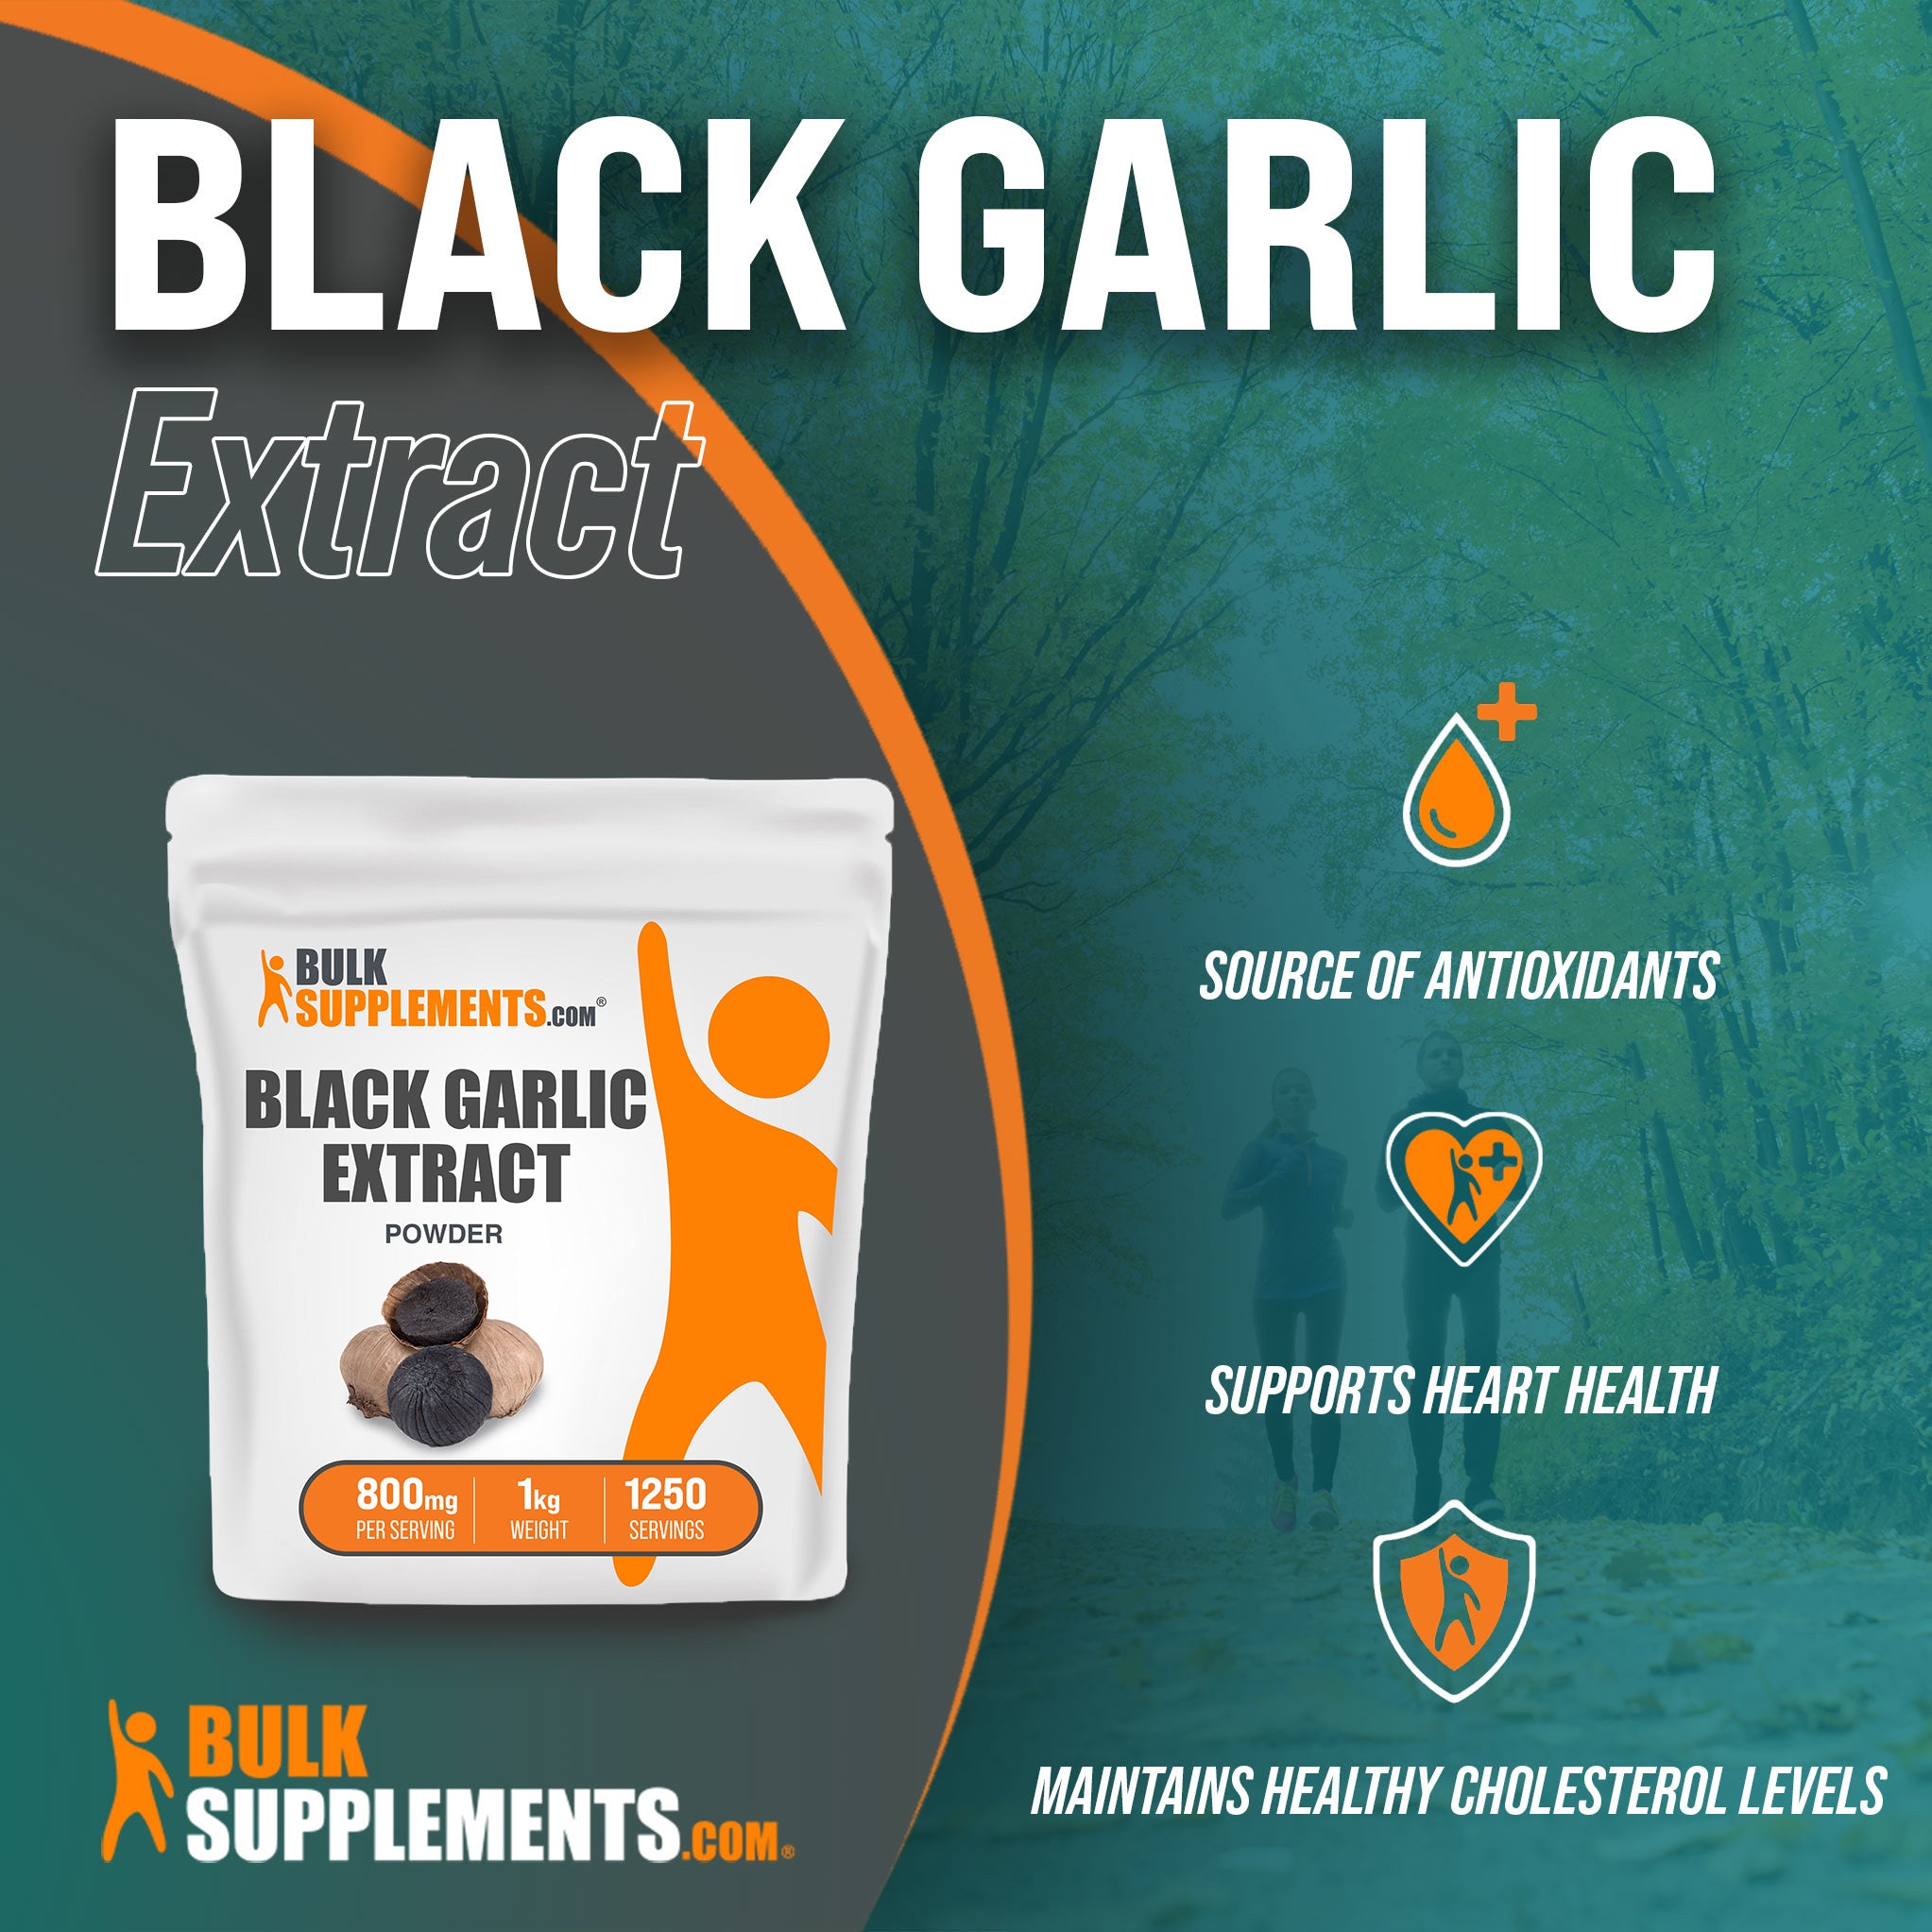 1kg bags of Black Garlic Extract are ideal antioxidants supplements